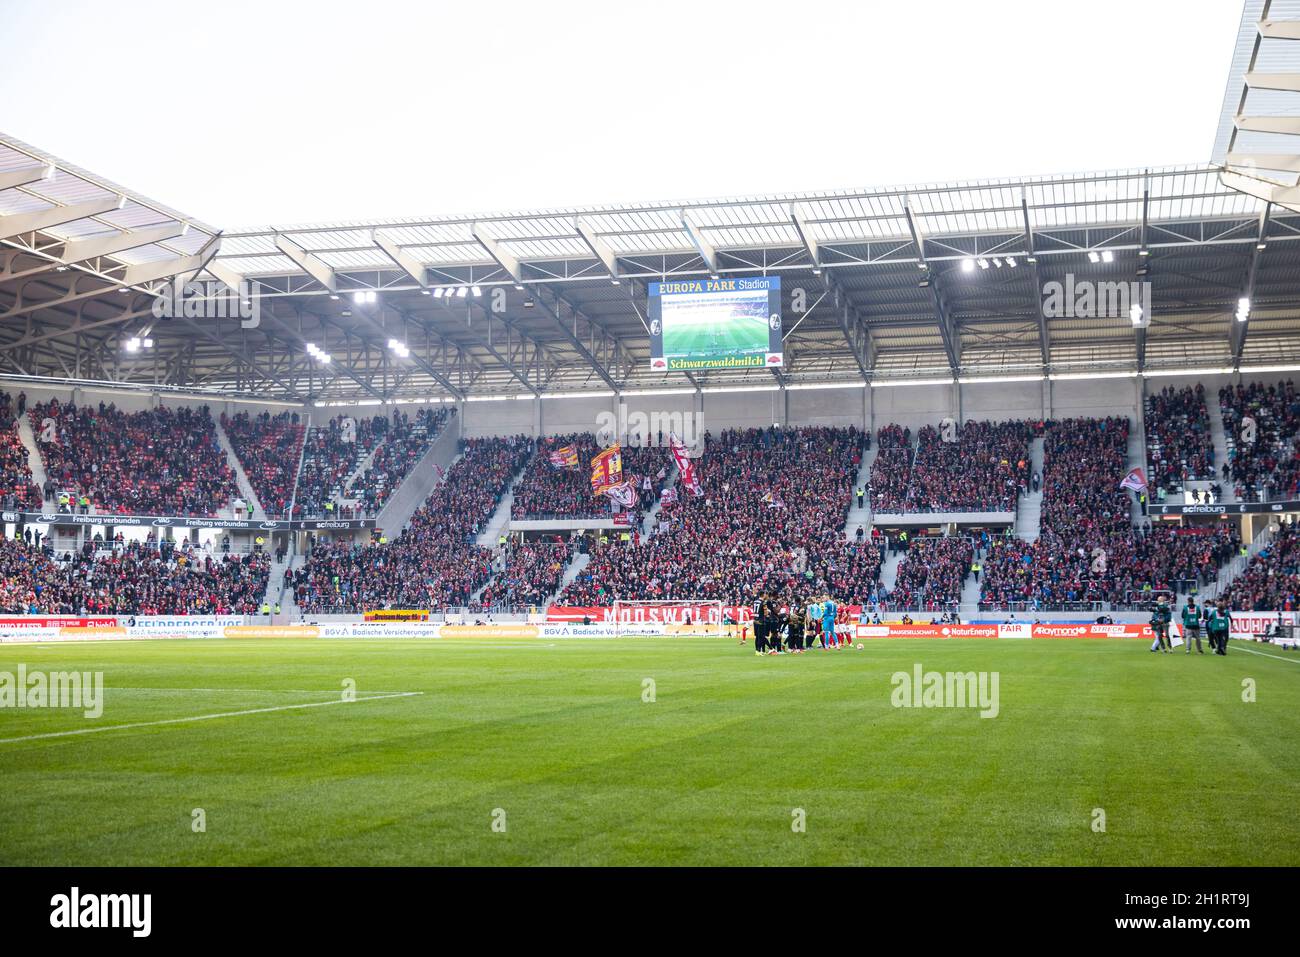 Freiburg Im Breisgau, Germany. 16th Oct, 2021. Football: Bundesliga, SC Freiburg - RB Leipzig, Matchday 8, Europa-Park Stadion. Overview of the new Europa-Park Stadium during the match. Credit: Tom Weller/dpa - IMPORTANT NOTE: In accordance with the regulations of the DFL Deutsche Fußball Liga and/or the DFB Deutscher Fußball-Bund, it is prohibited to use or have used photographs taken in the stadium and/or of the match in the form of sequence pictures and/or video-like photo series./dpa/Alamy Live News Stock Photo